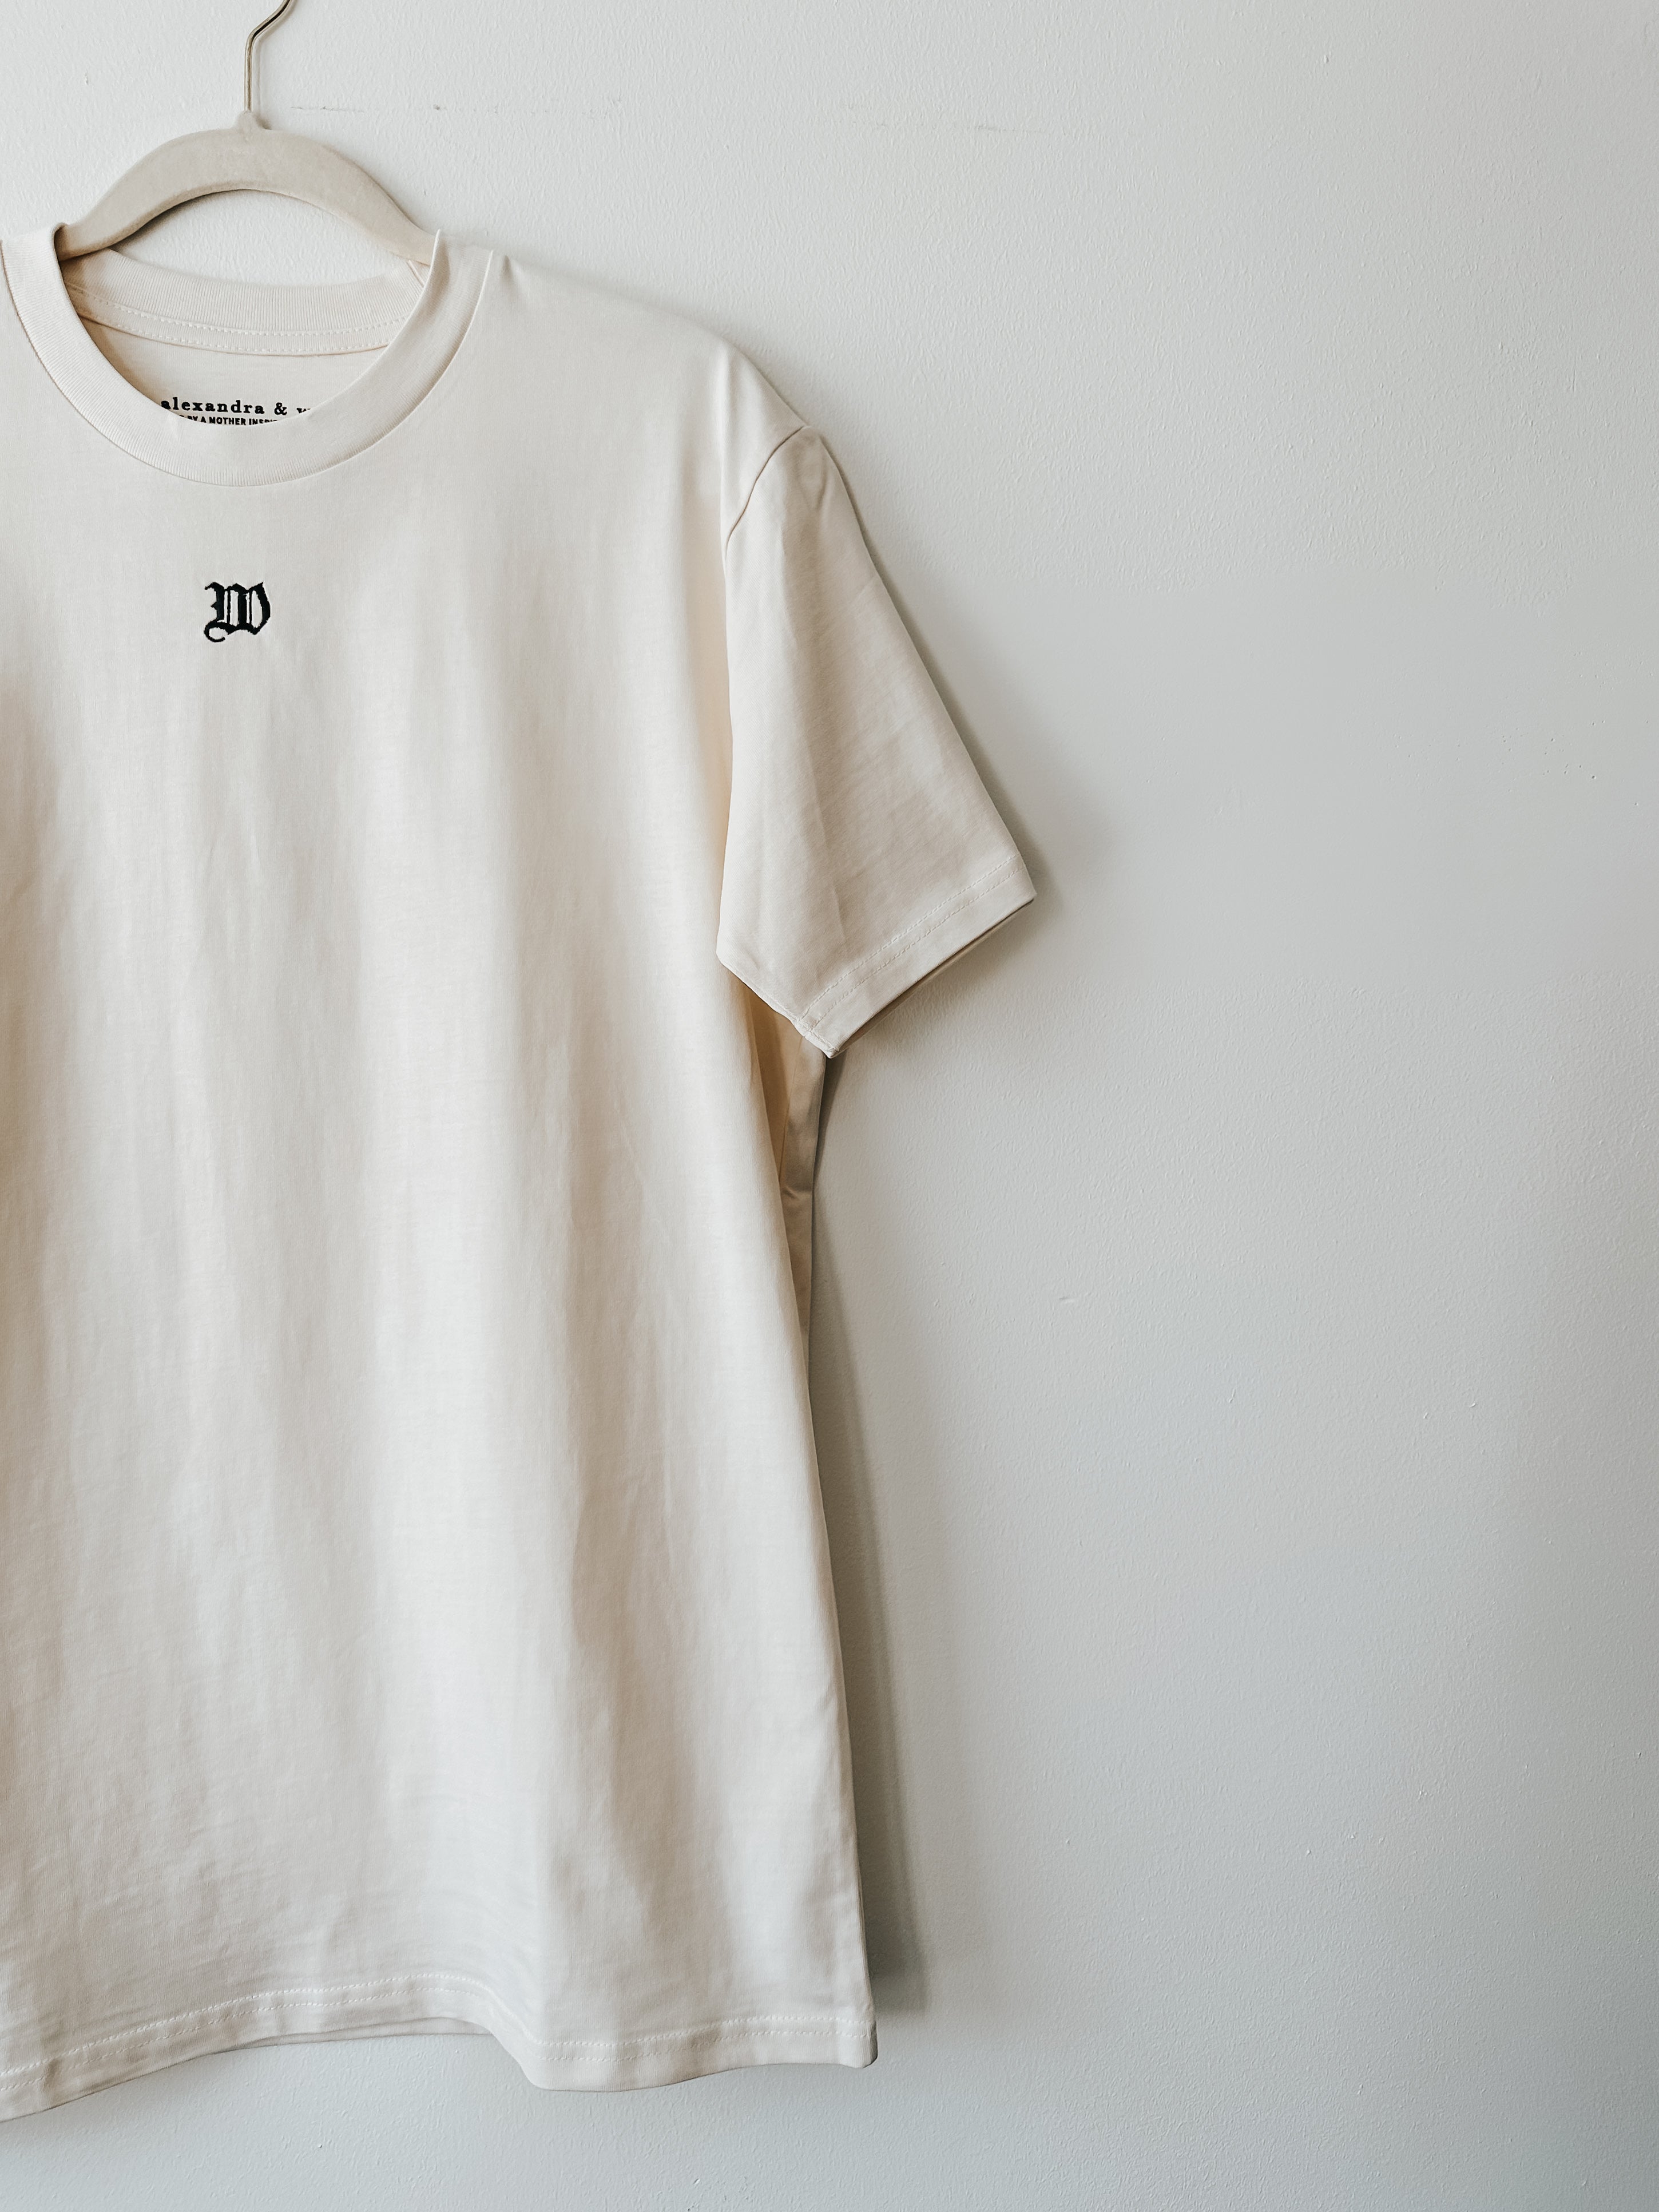 Classic Tee | Old English Letter